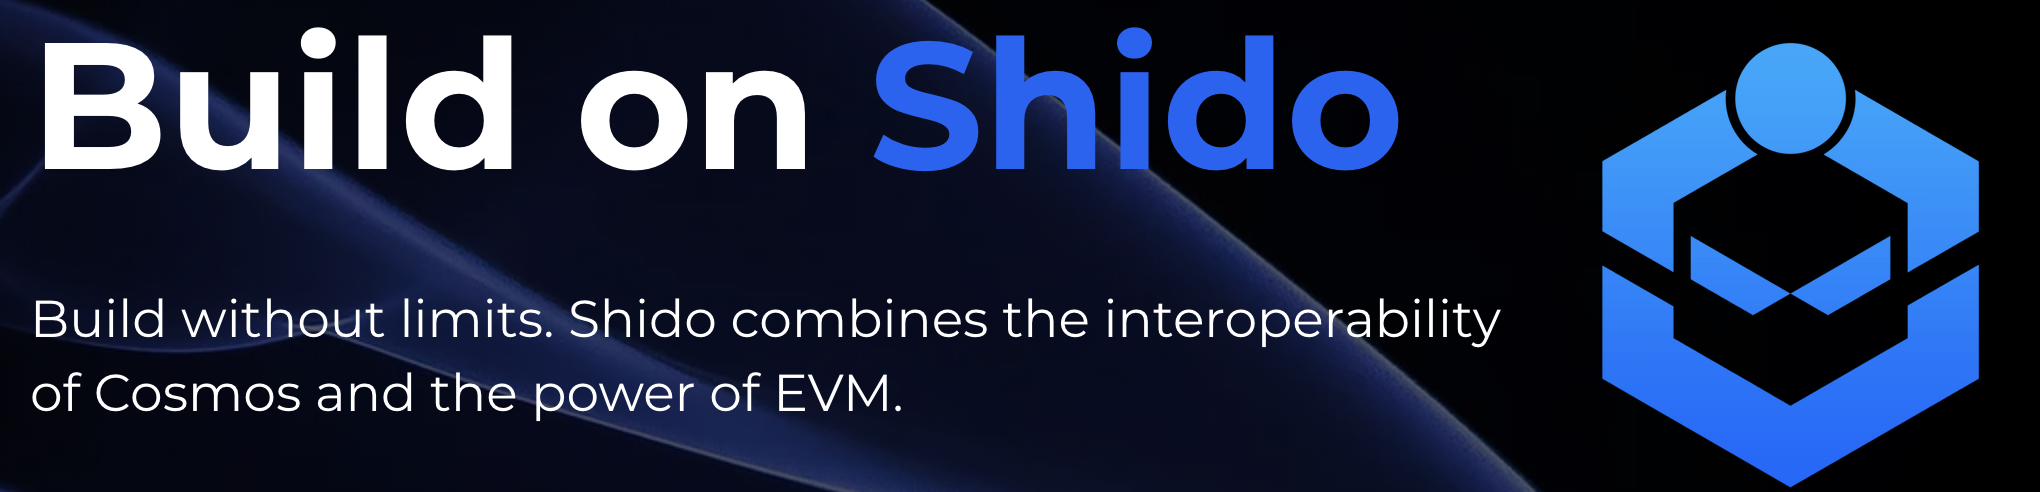 Official Shido banner stating: "Build on Shido - Use Shido Blockchain combining the interoperability of Cosmos and power of EVM."